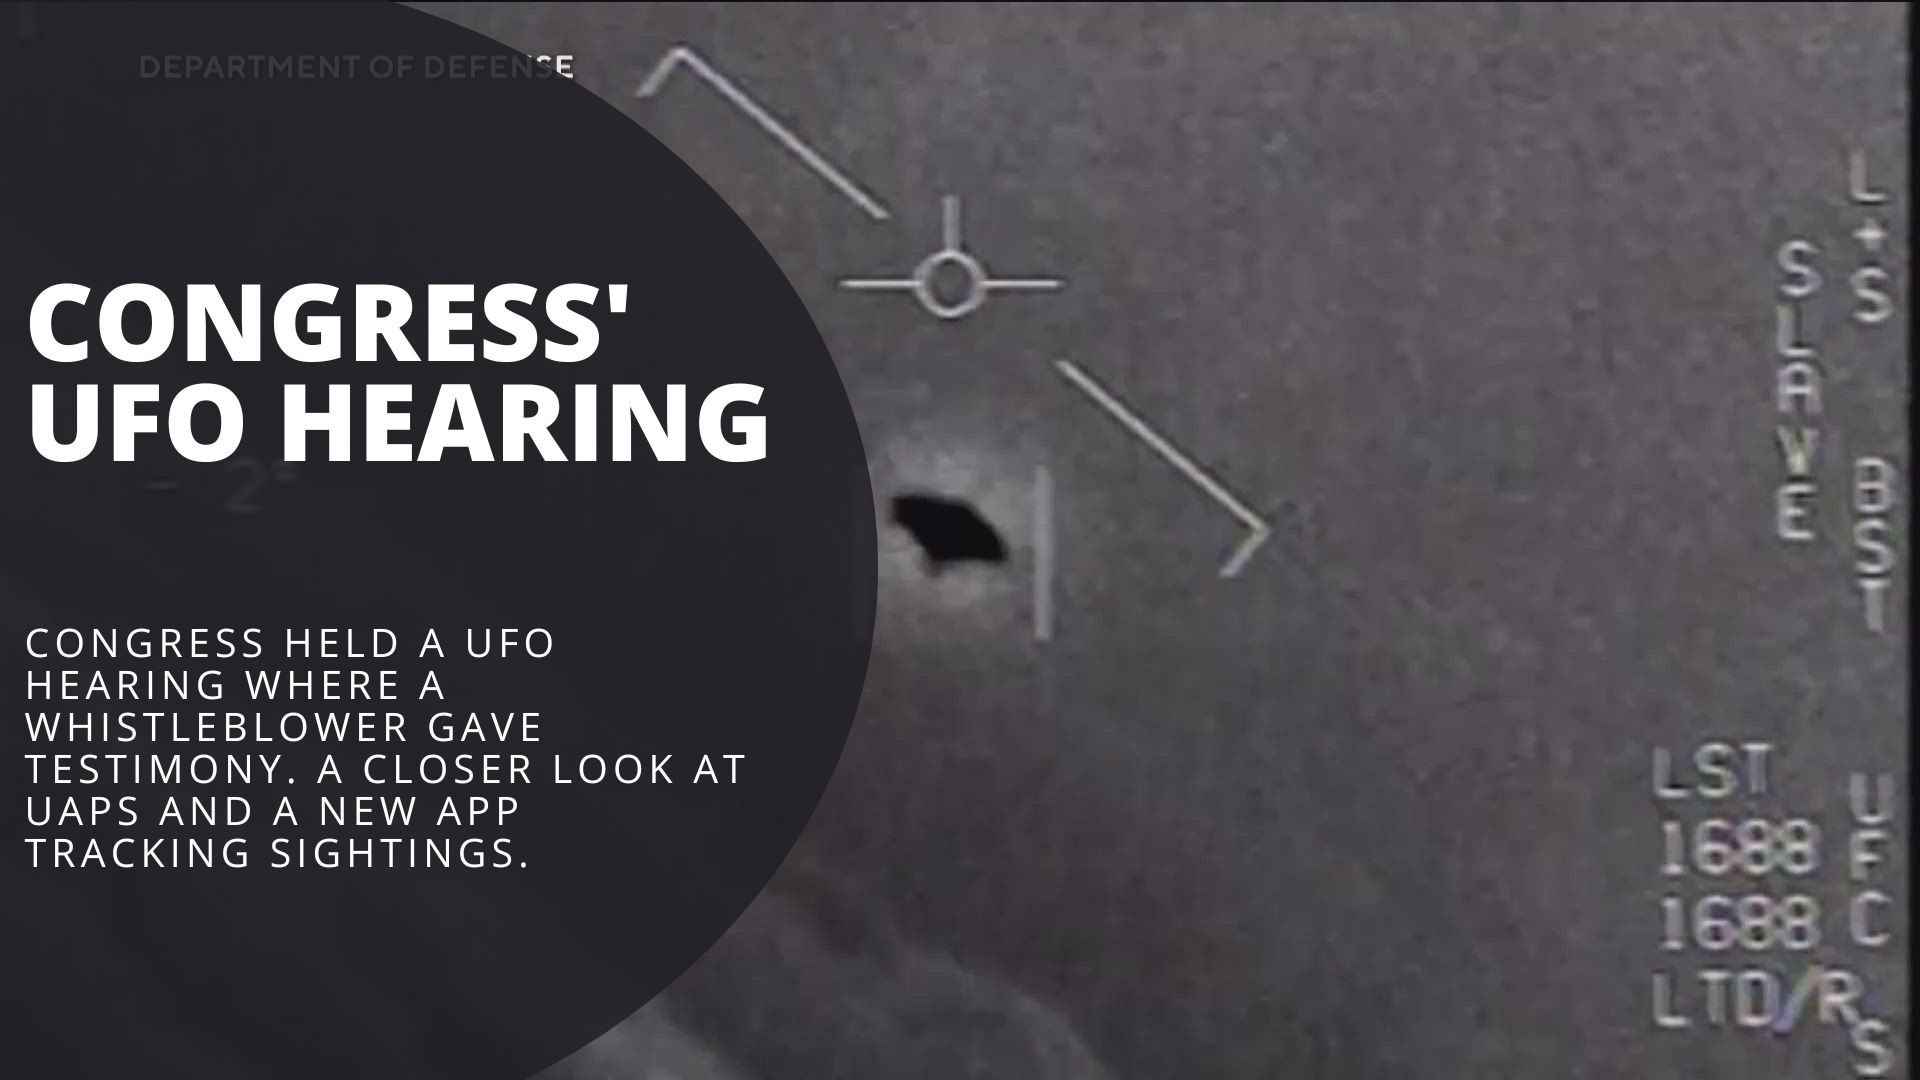 In the News Now: UFO Congressional Hearing | 12newsnow.com